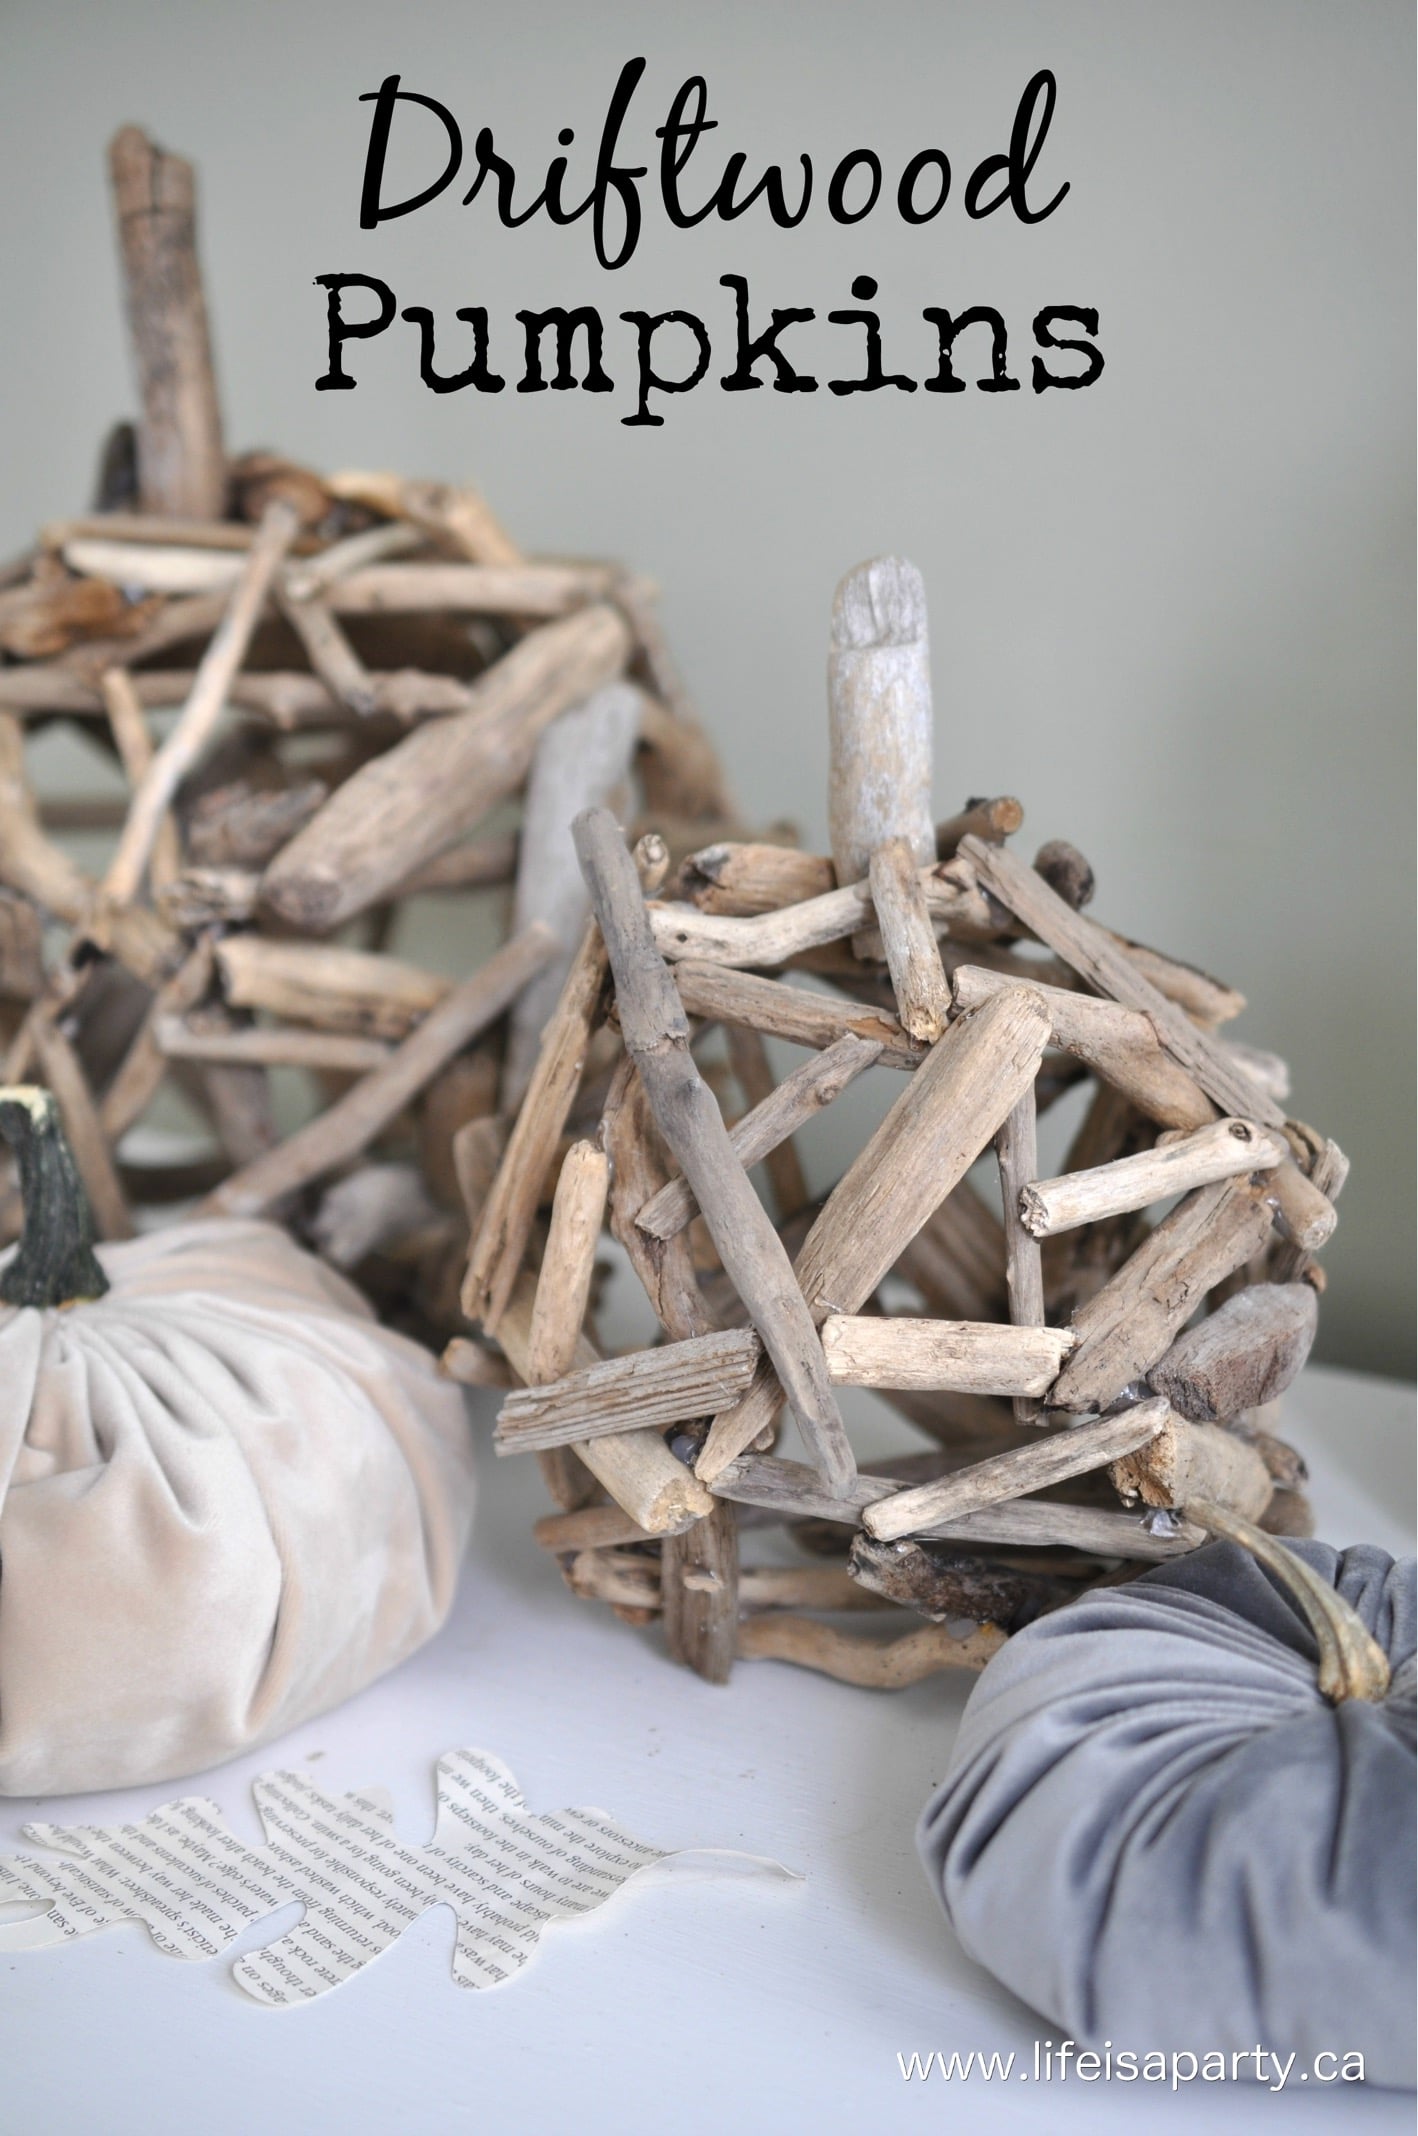 DIY Wood Pumpkins: made from collected driftwood pieces, these easy and beautiful DIY driftwood pumpkins are the perfect addition to your fall decor.